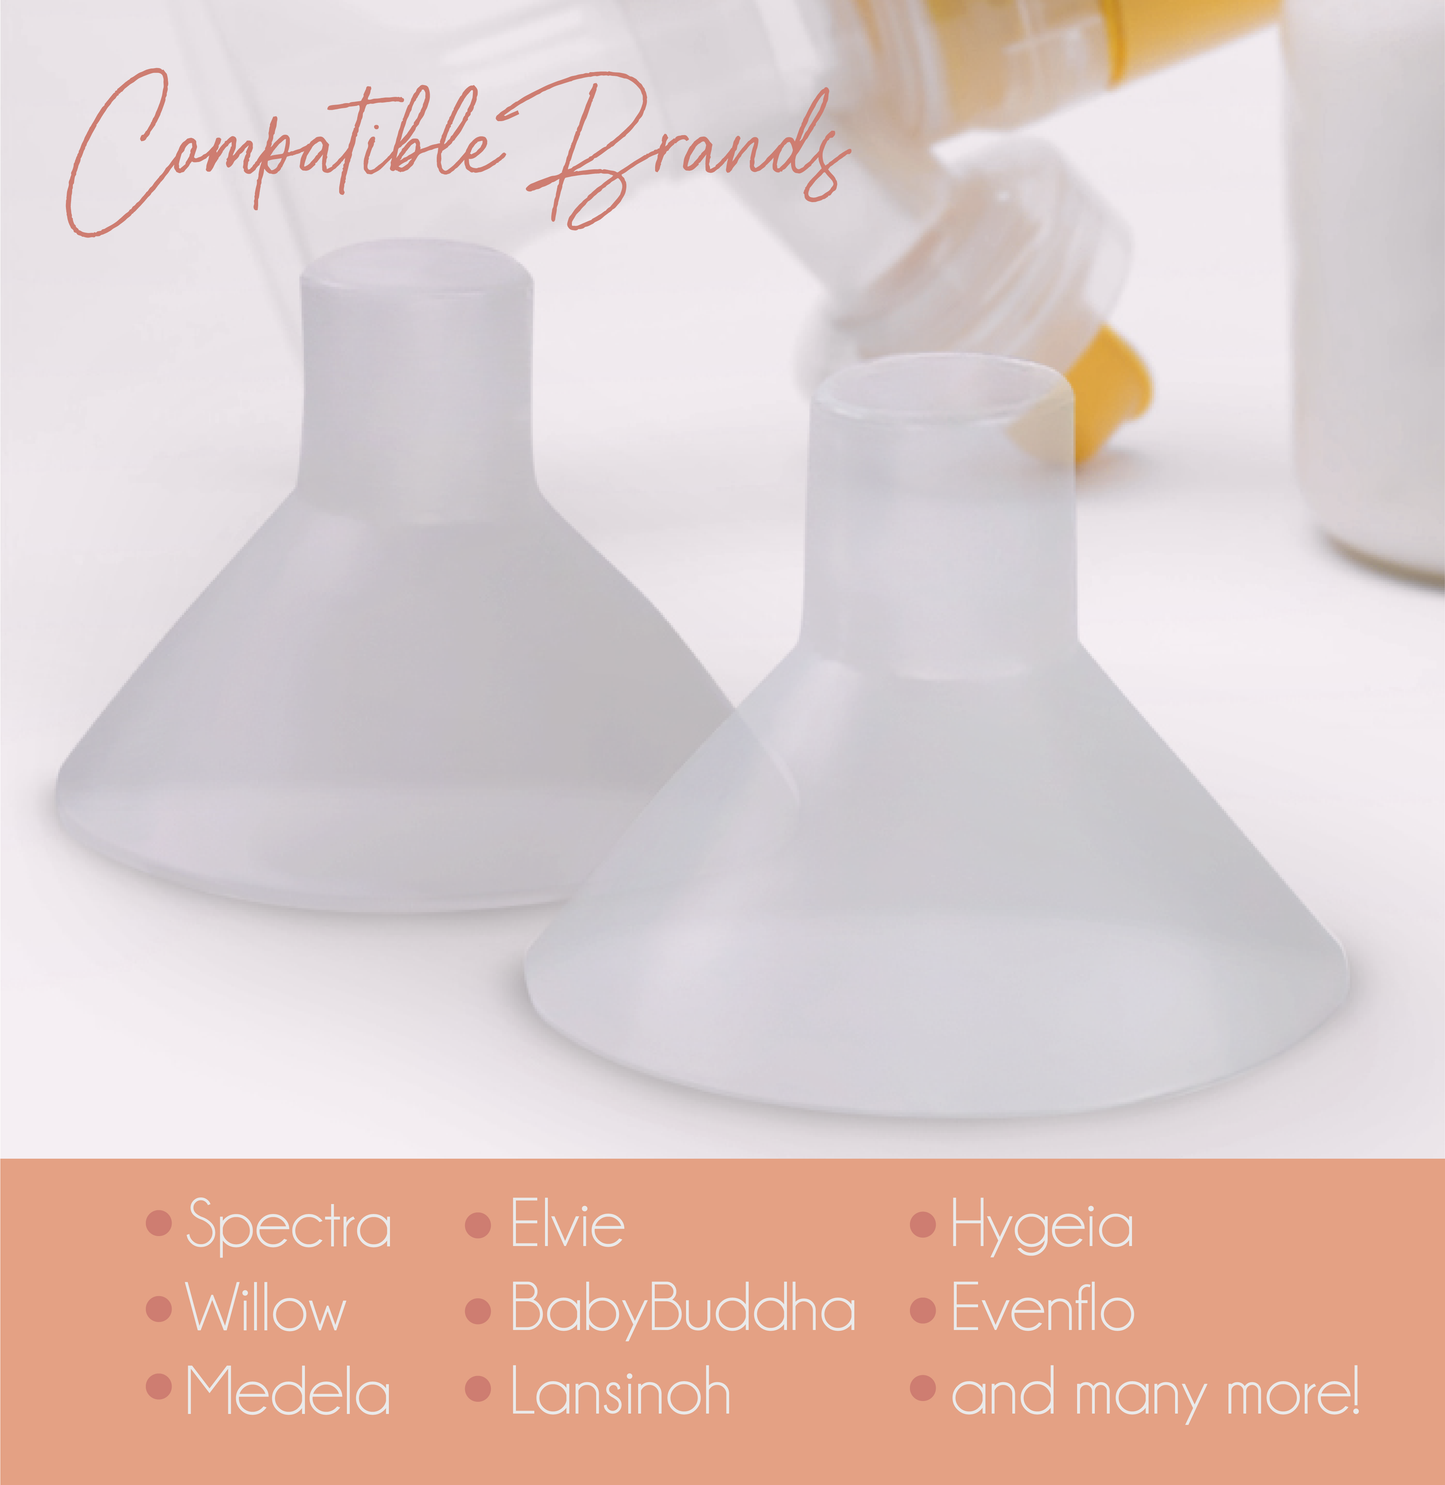 Fall in love with your breast pump. You can now with BeauGen's Breast Pump Cushions, which are compatible with most major pumps. Find your pump in this image and then order your four pack today.